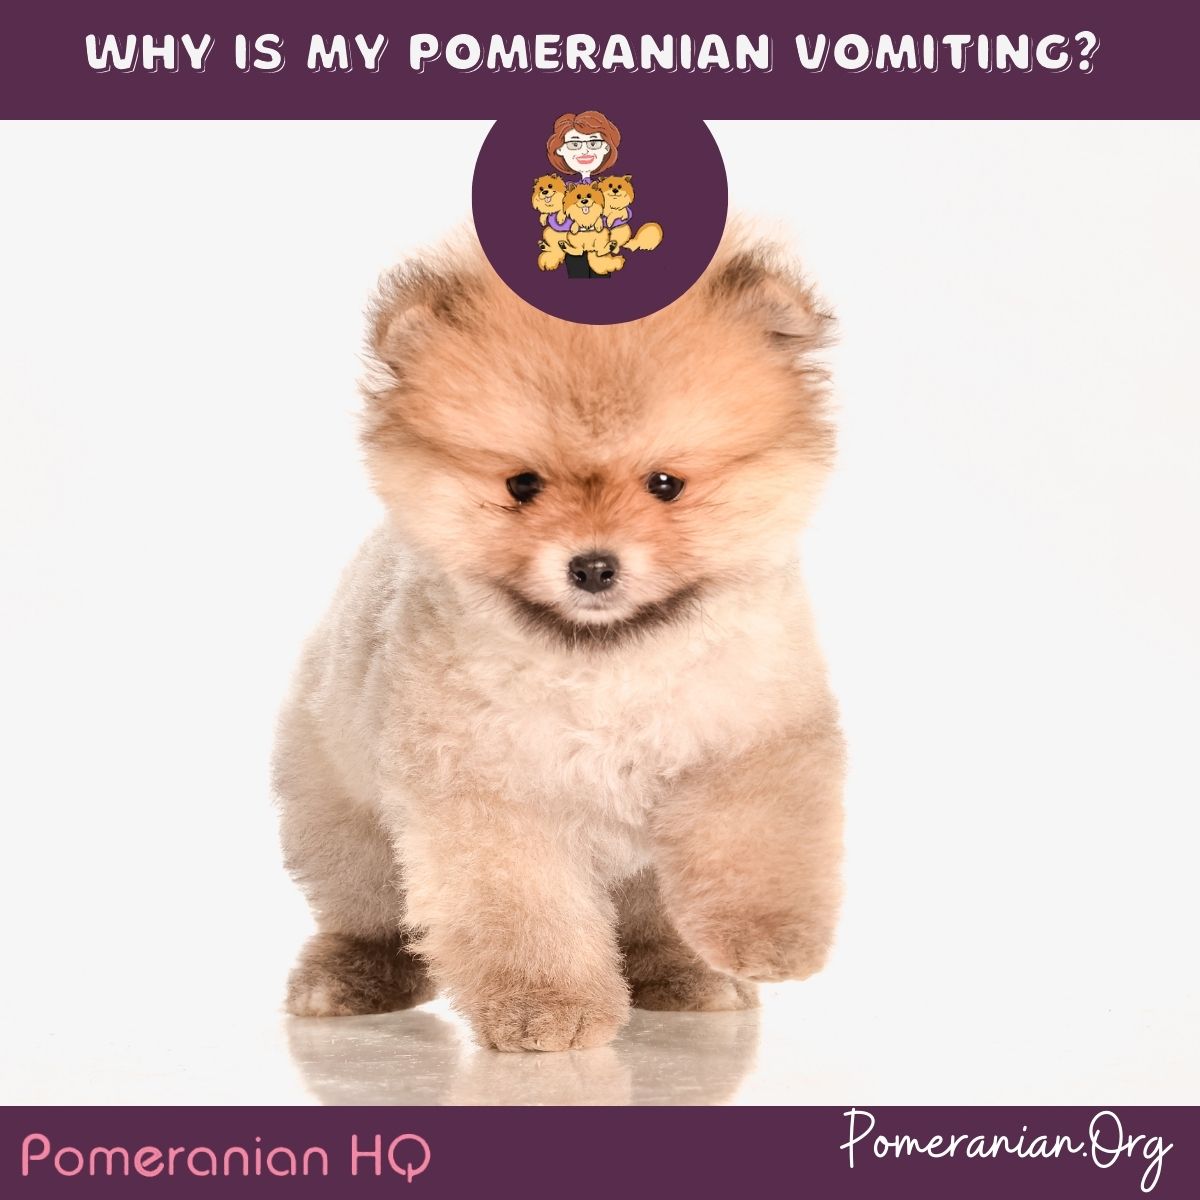 Why Is My Pomeranian Vomiting?